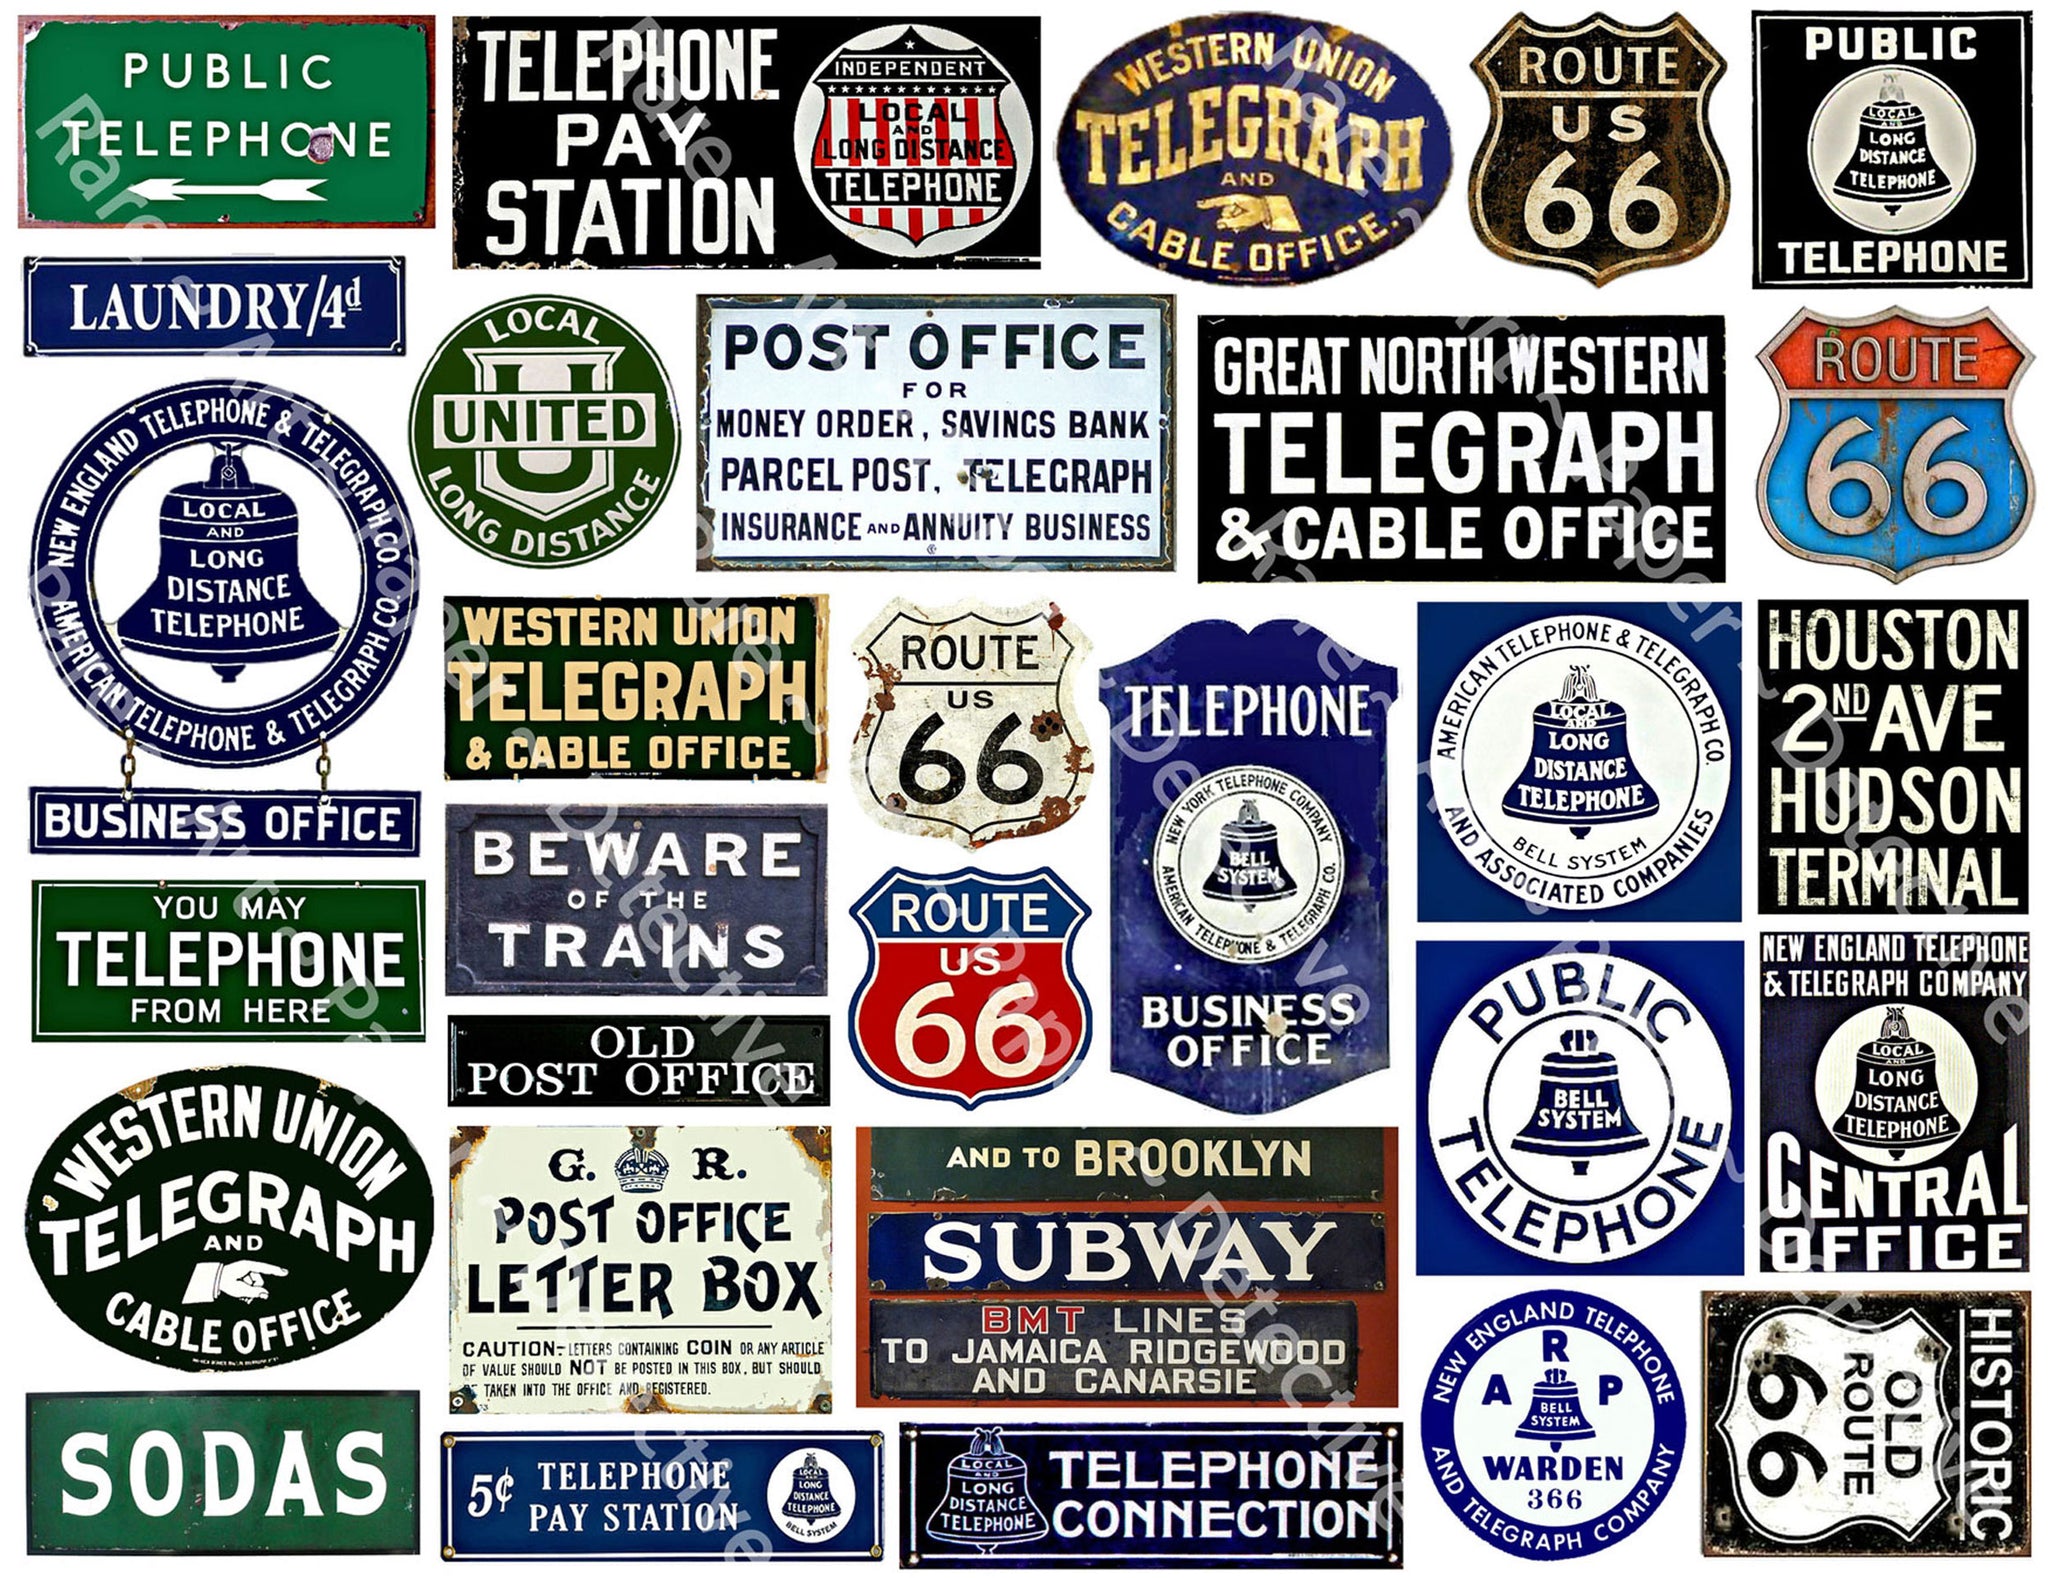 Travel Sign Stickers, Telephone, Telegraph & Route 66, Miniature Signs for Journals & Model Building, 8.5" x 11" Sheet, #782